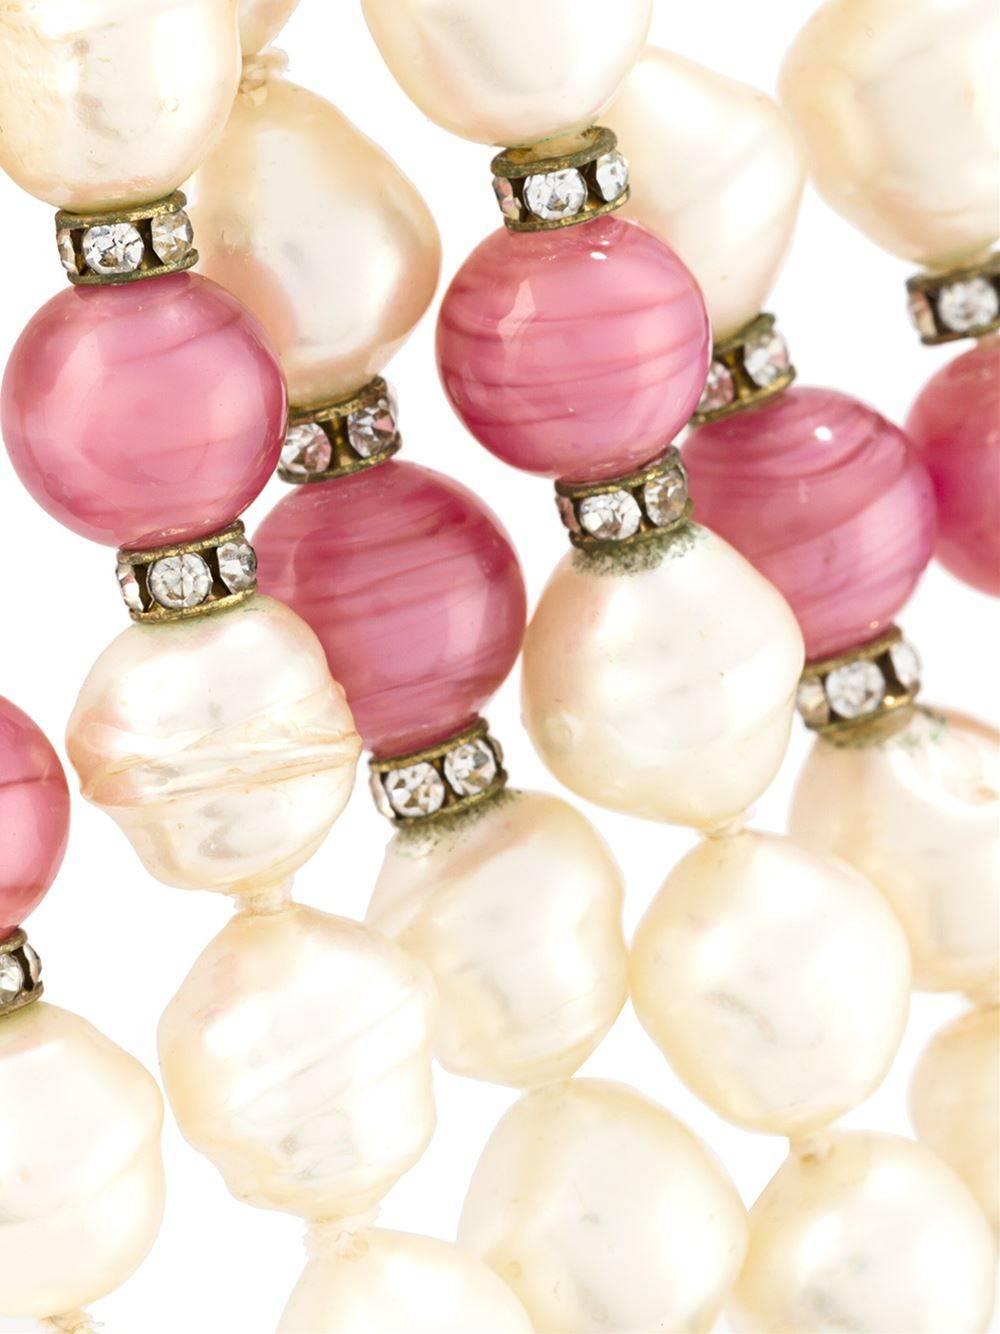 White, pink and blue pearl bead necklace.

Colour: White / Pink / Blue

Material: Pearls

Measurements: W: 5cm, Circumference: 43.2cm

Condition: 9 out of 10
Excellent